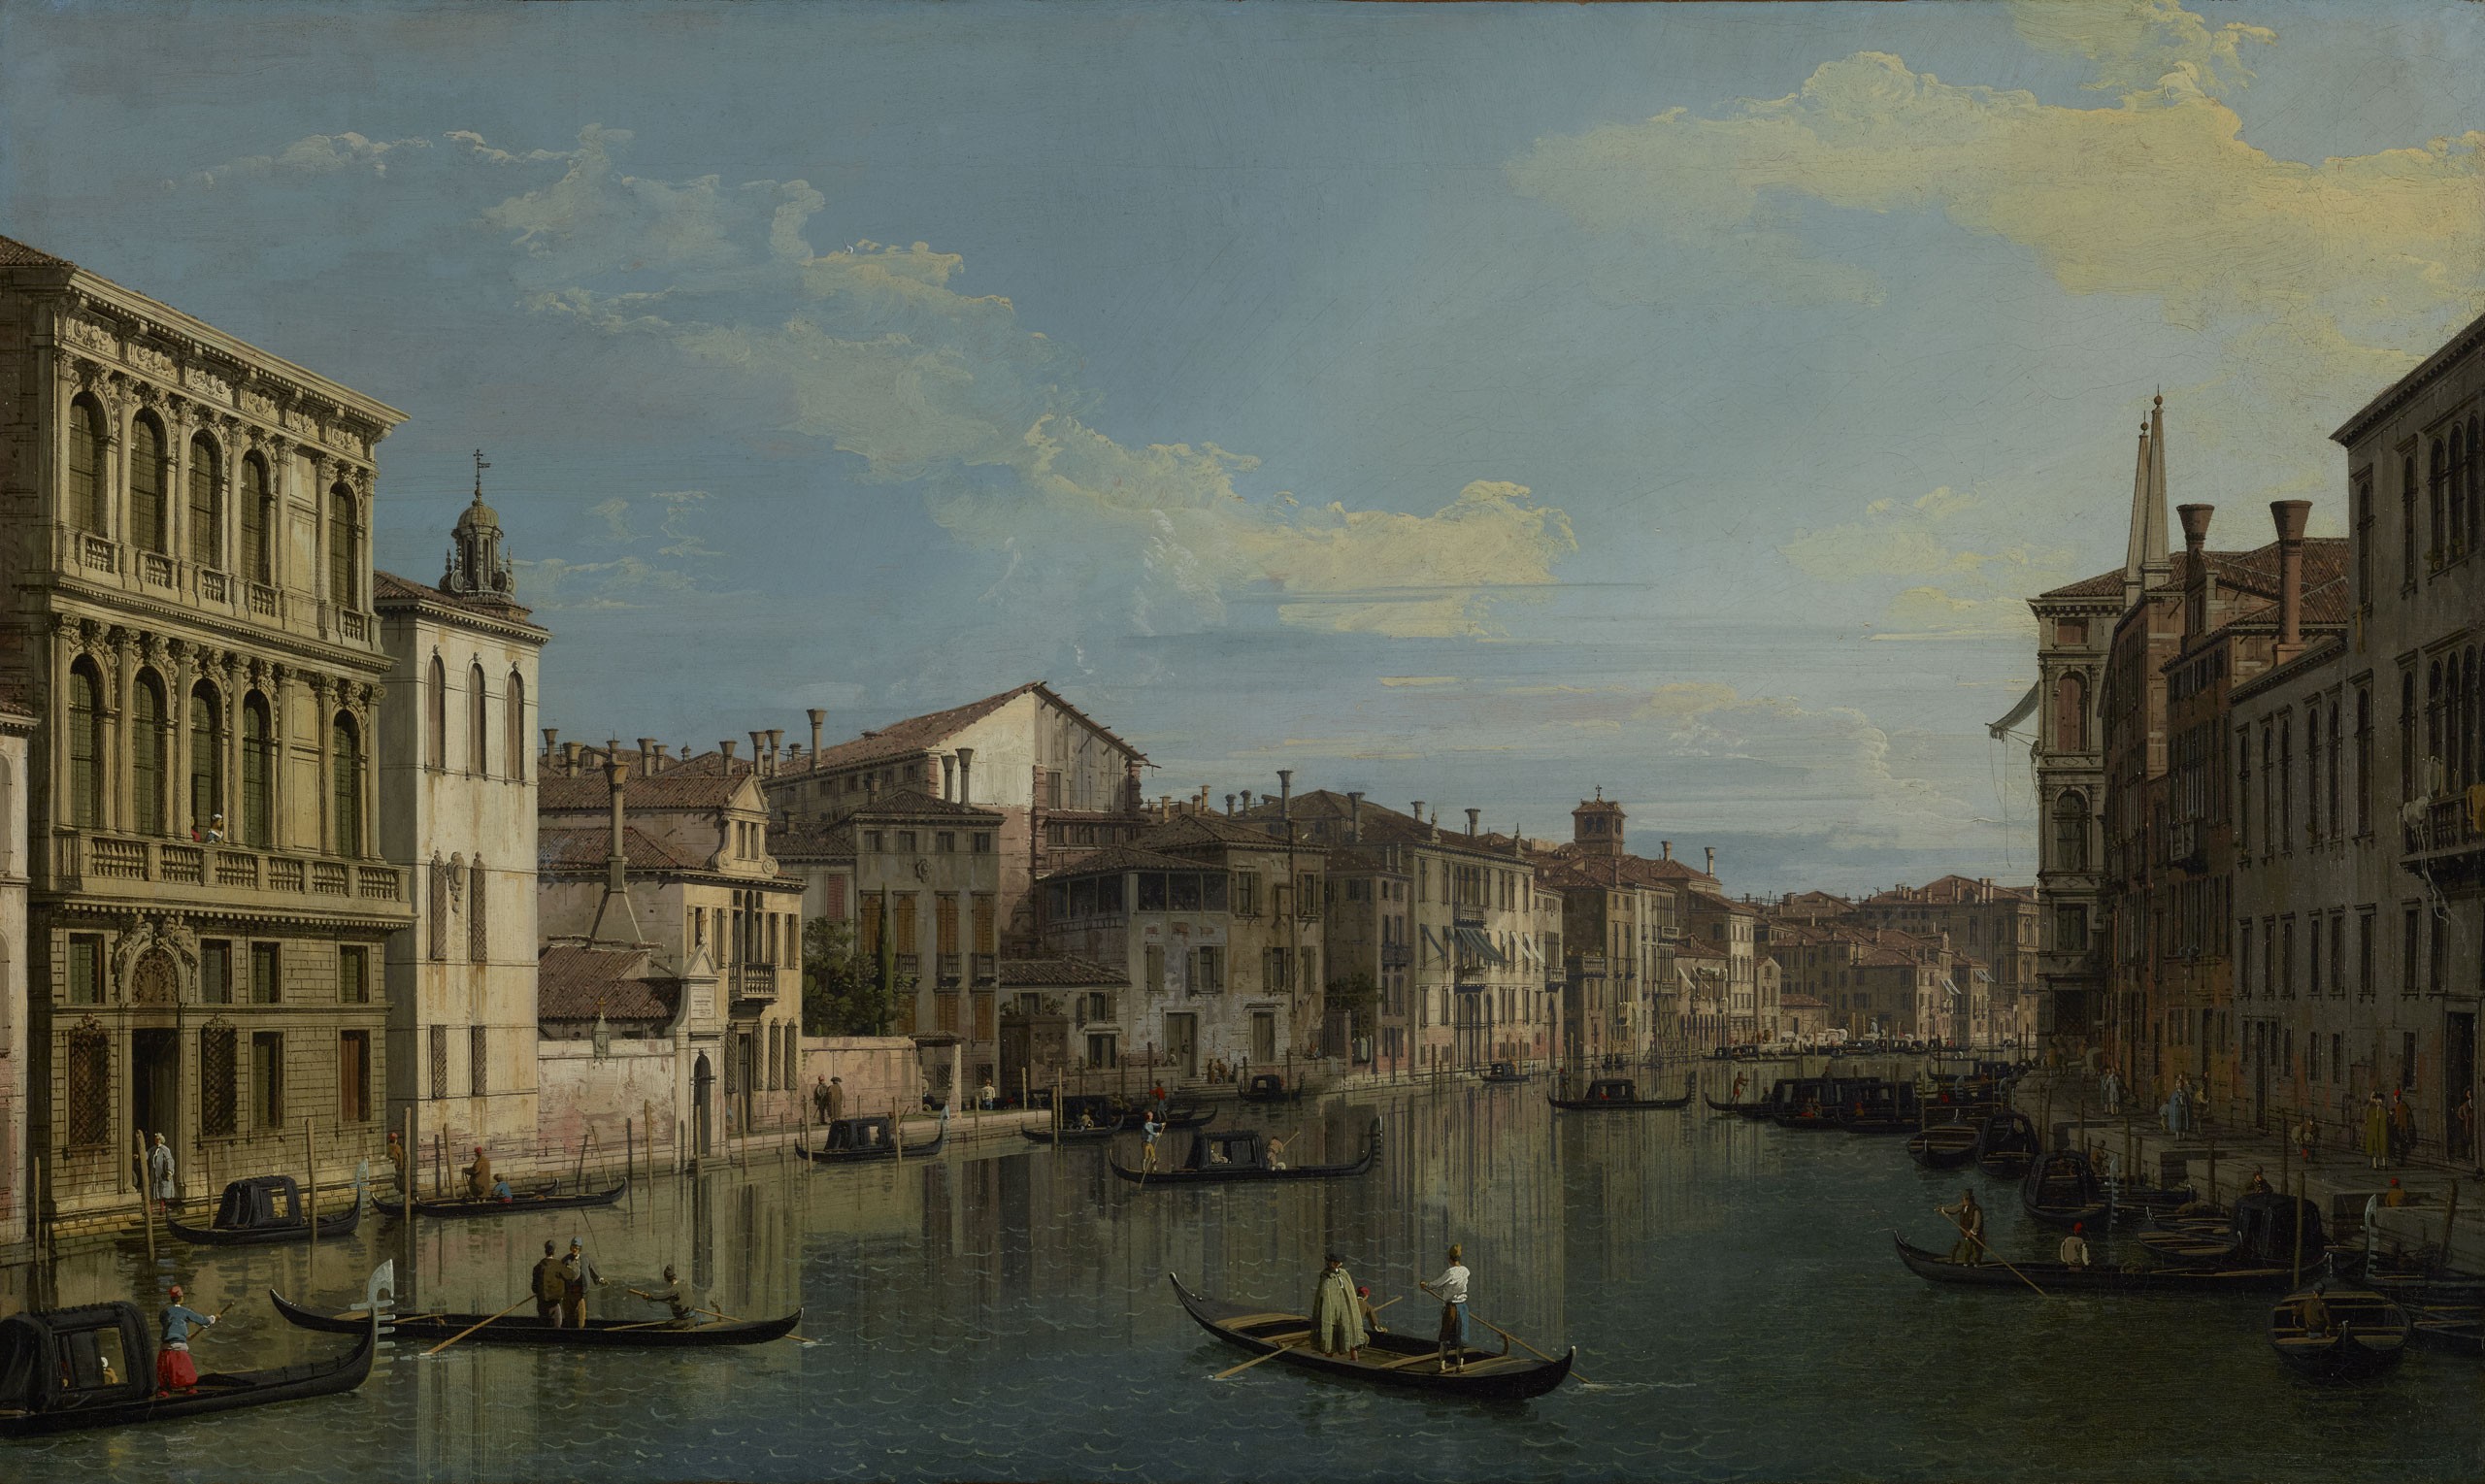 The Grand Canal in Venice from Palazzo Flangini to Campo San Marcuola, c.1738, Oil on Canvas